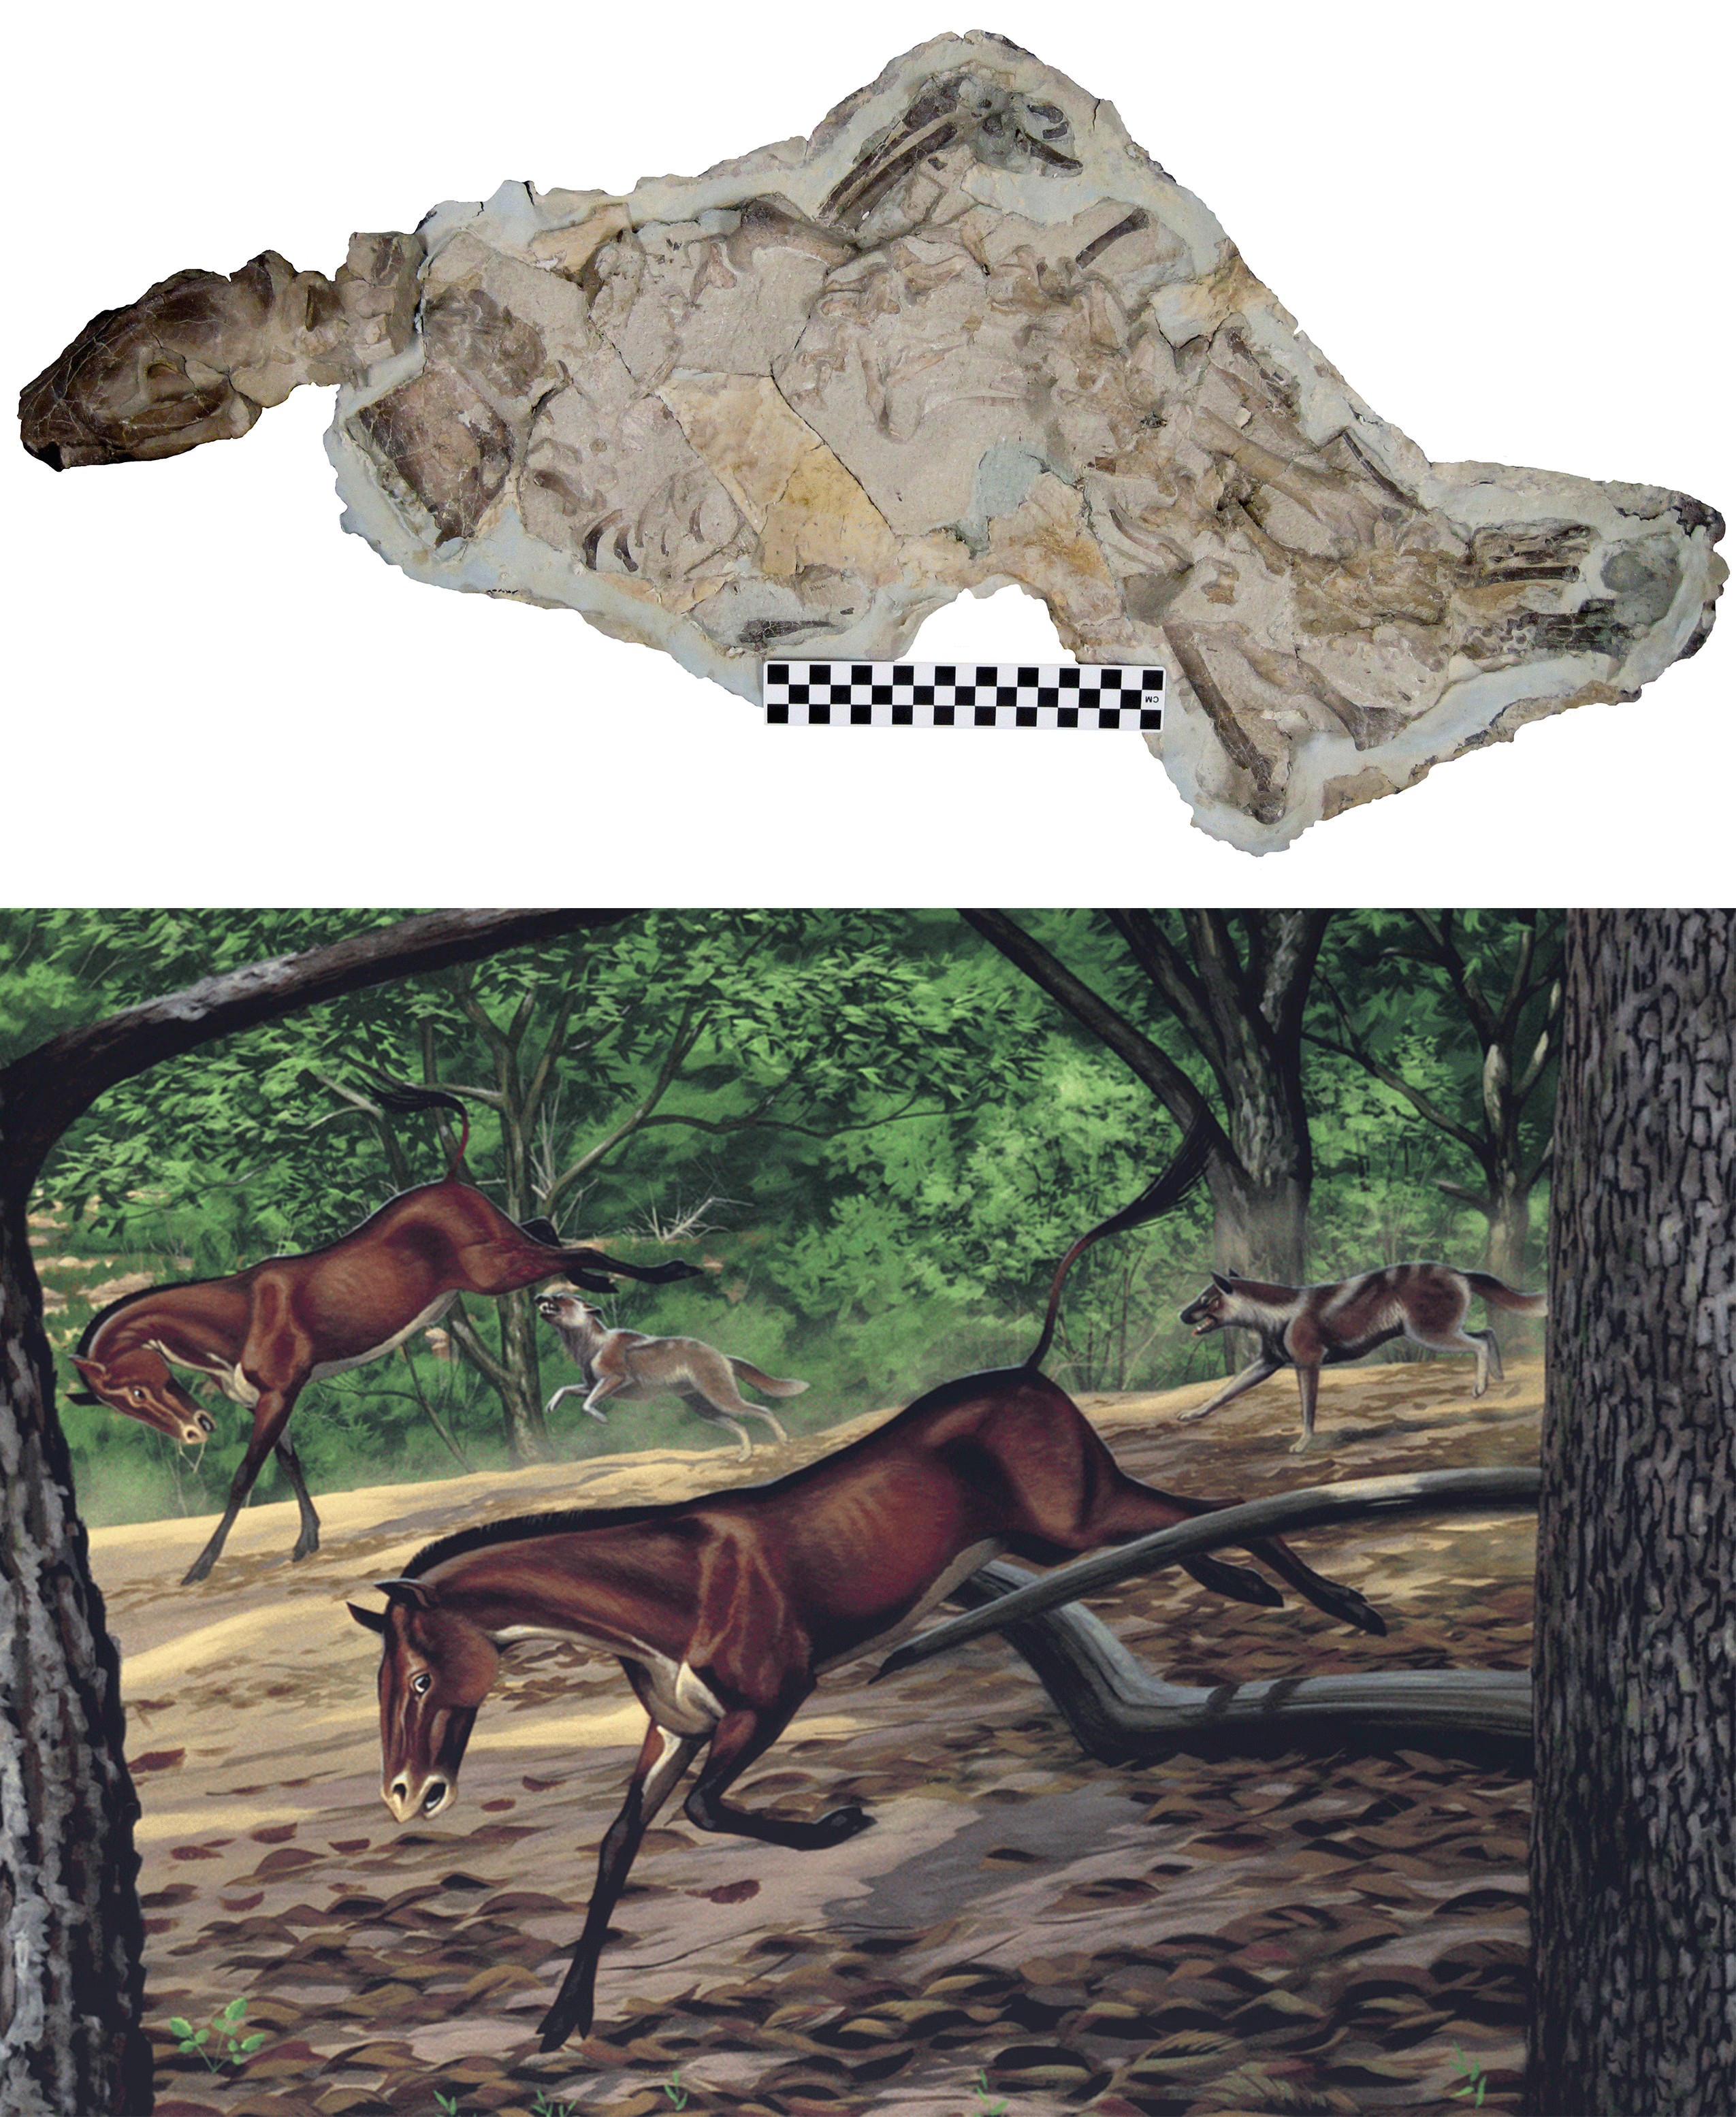 Above: 30 million year old dog skeleton, Mesocyon coryphaeus (JODA 3366), included in the new study.
Below: Mural from John Day Fossil Beds National Monument depicting several early dogs (Mesocyon) chasing a 3-toed horse (Miohippus) through an ancient forest in Oregon. Mural art by Roger Witter.